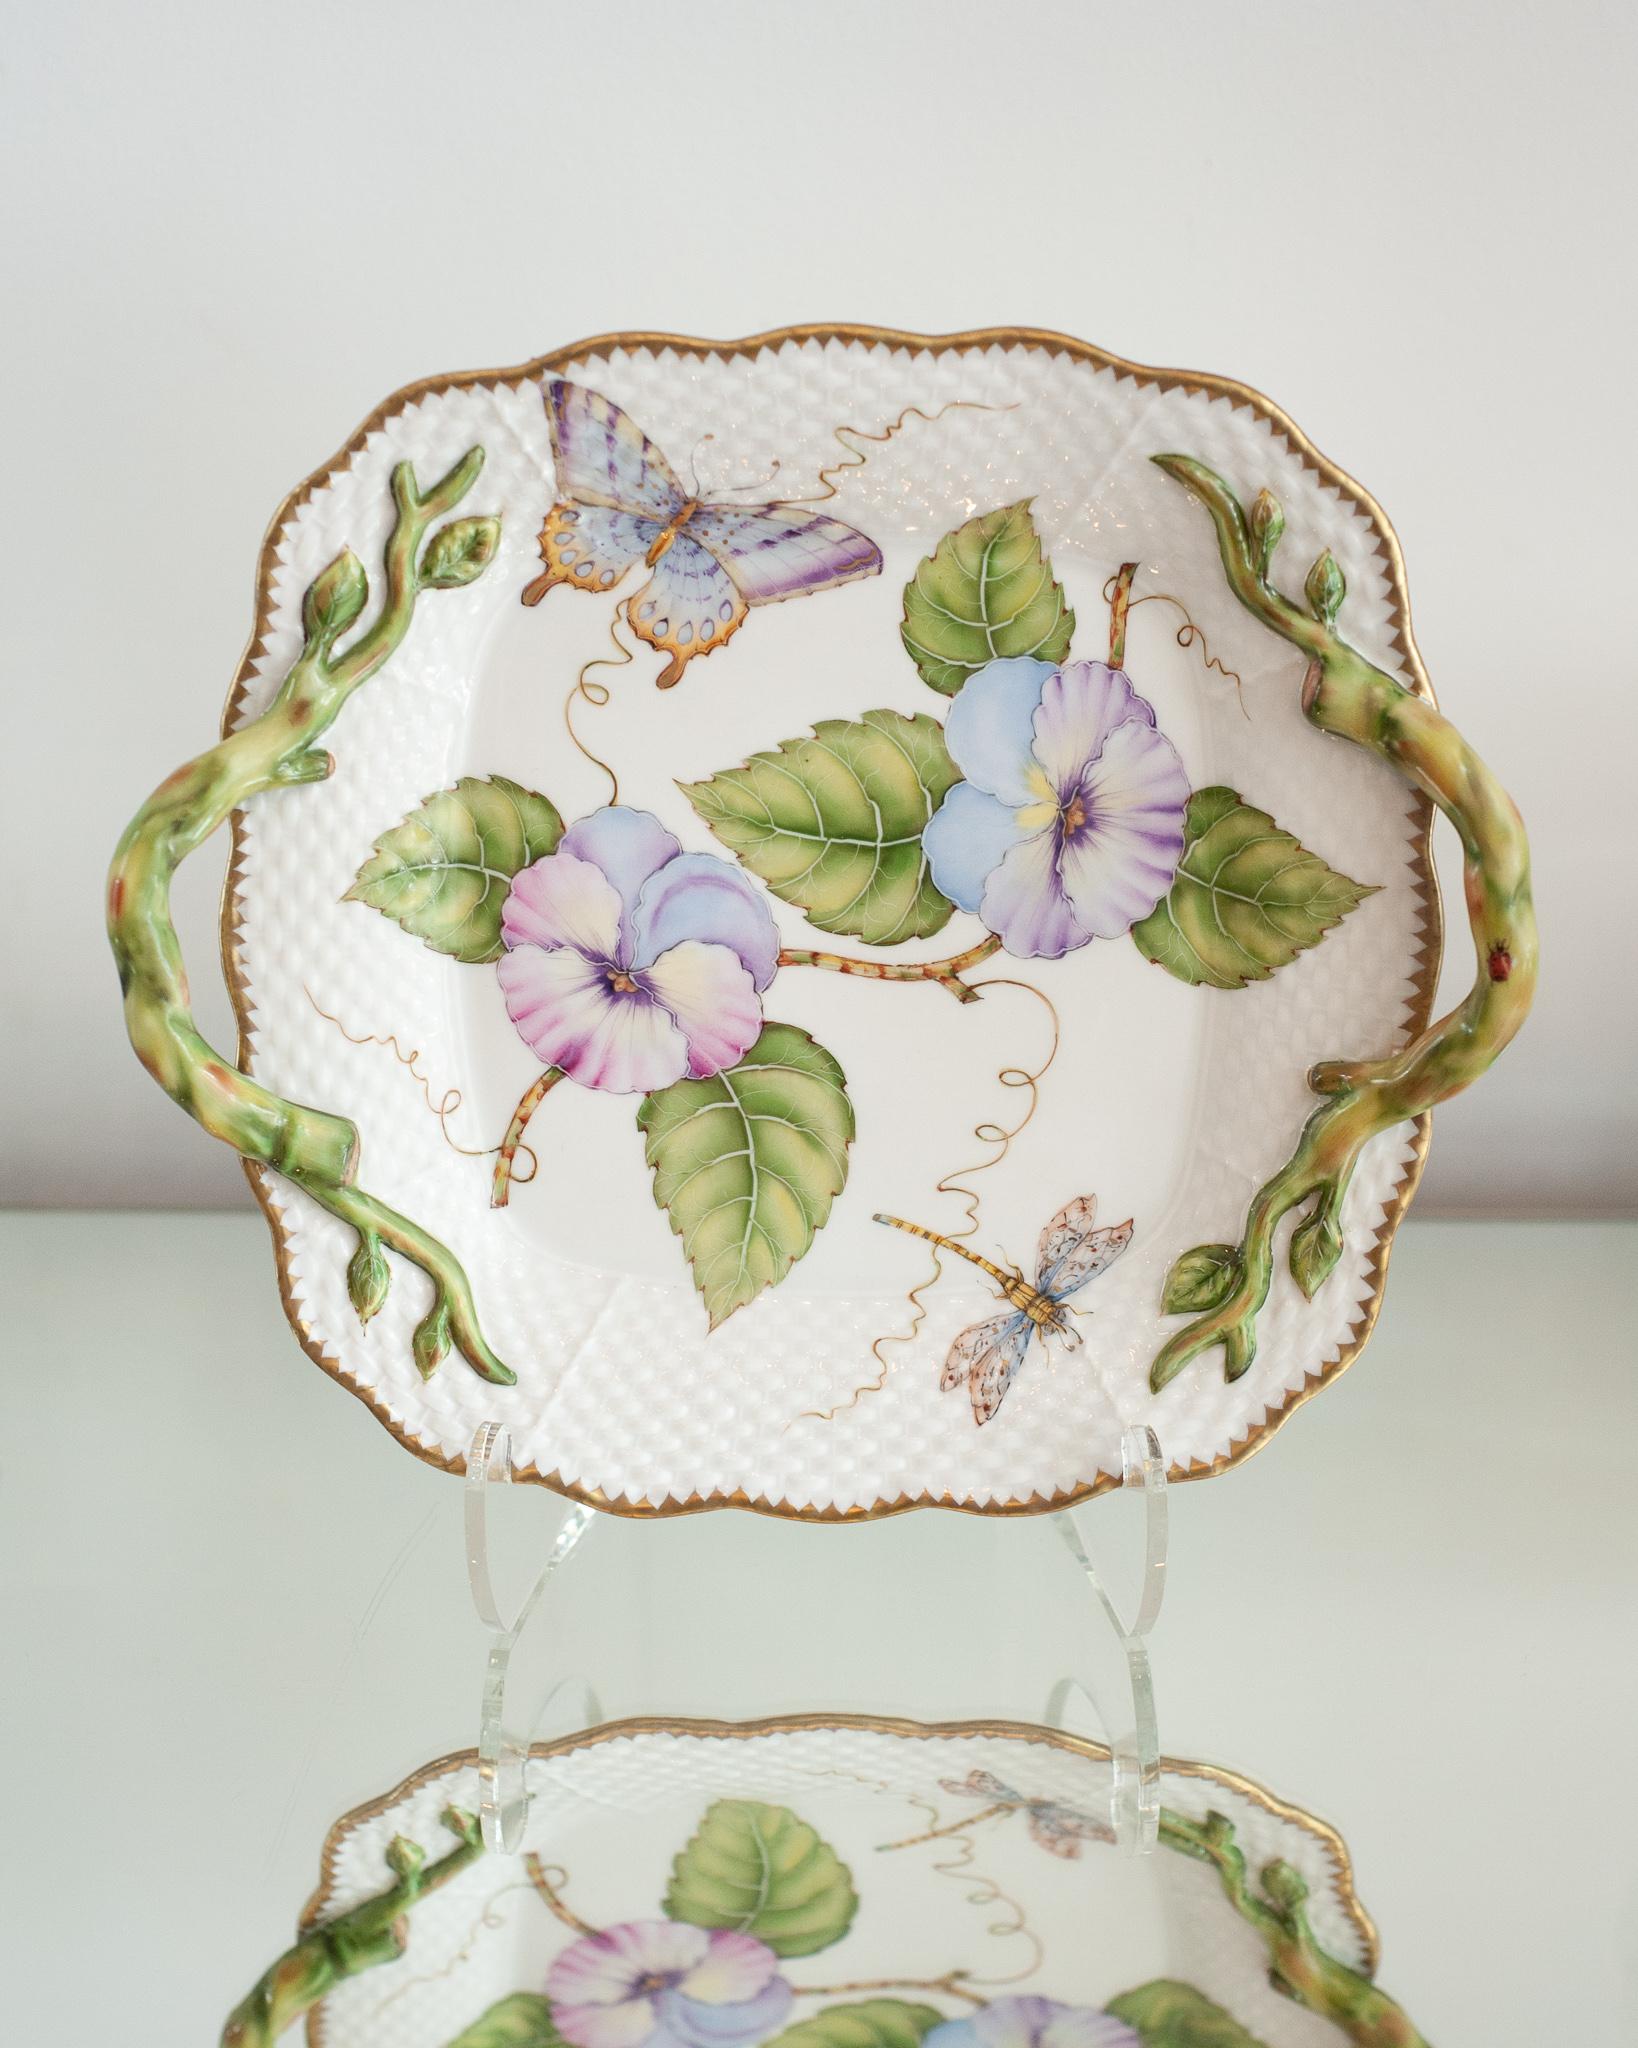 A beautiful hand painted square serving tray with handles, by Anna Weatherley Designs. Anna Weatherley has been designing and producing Fine Botanical Hand Painted Porcelain in Hungary for 30 years.